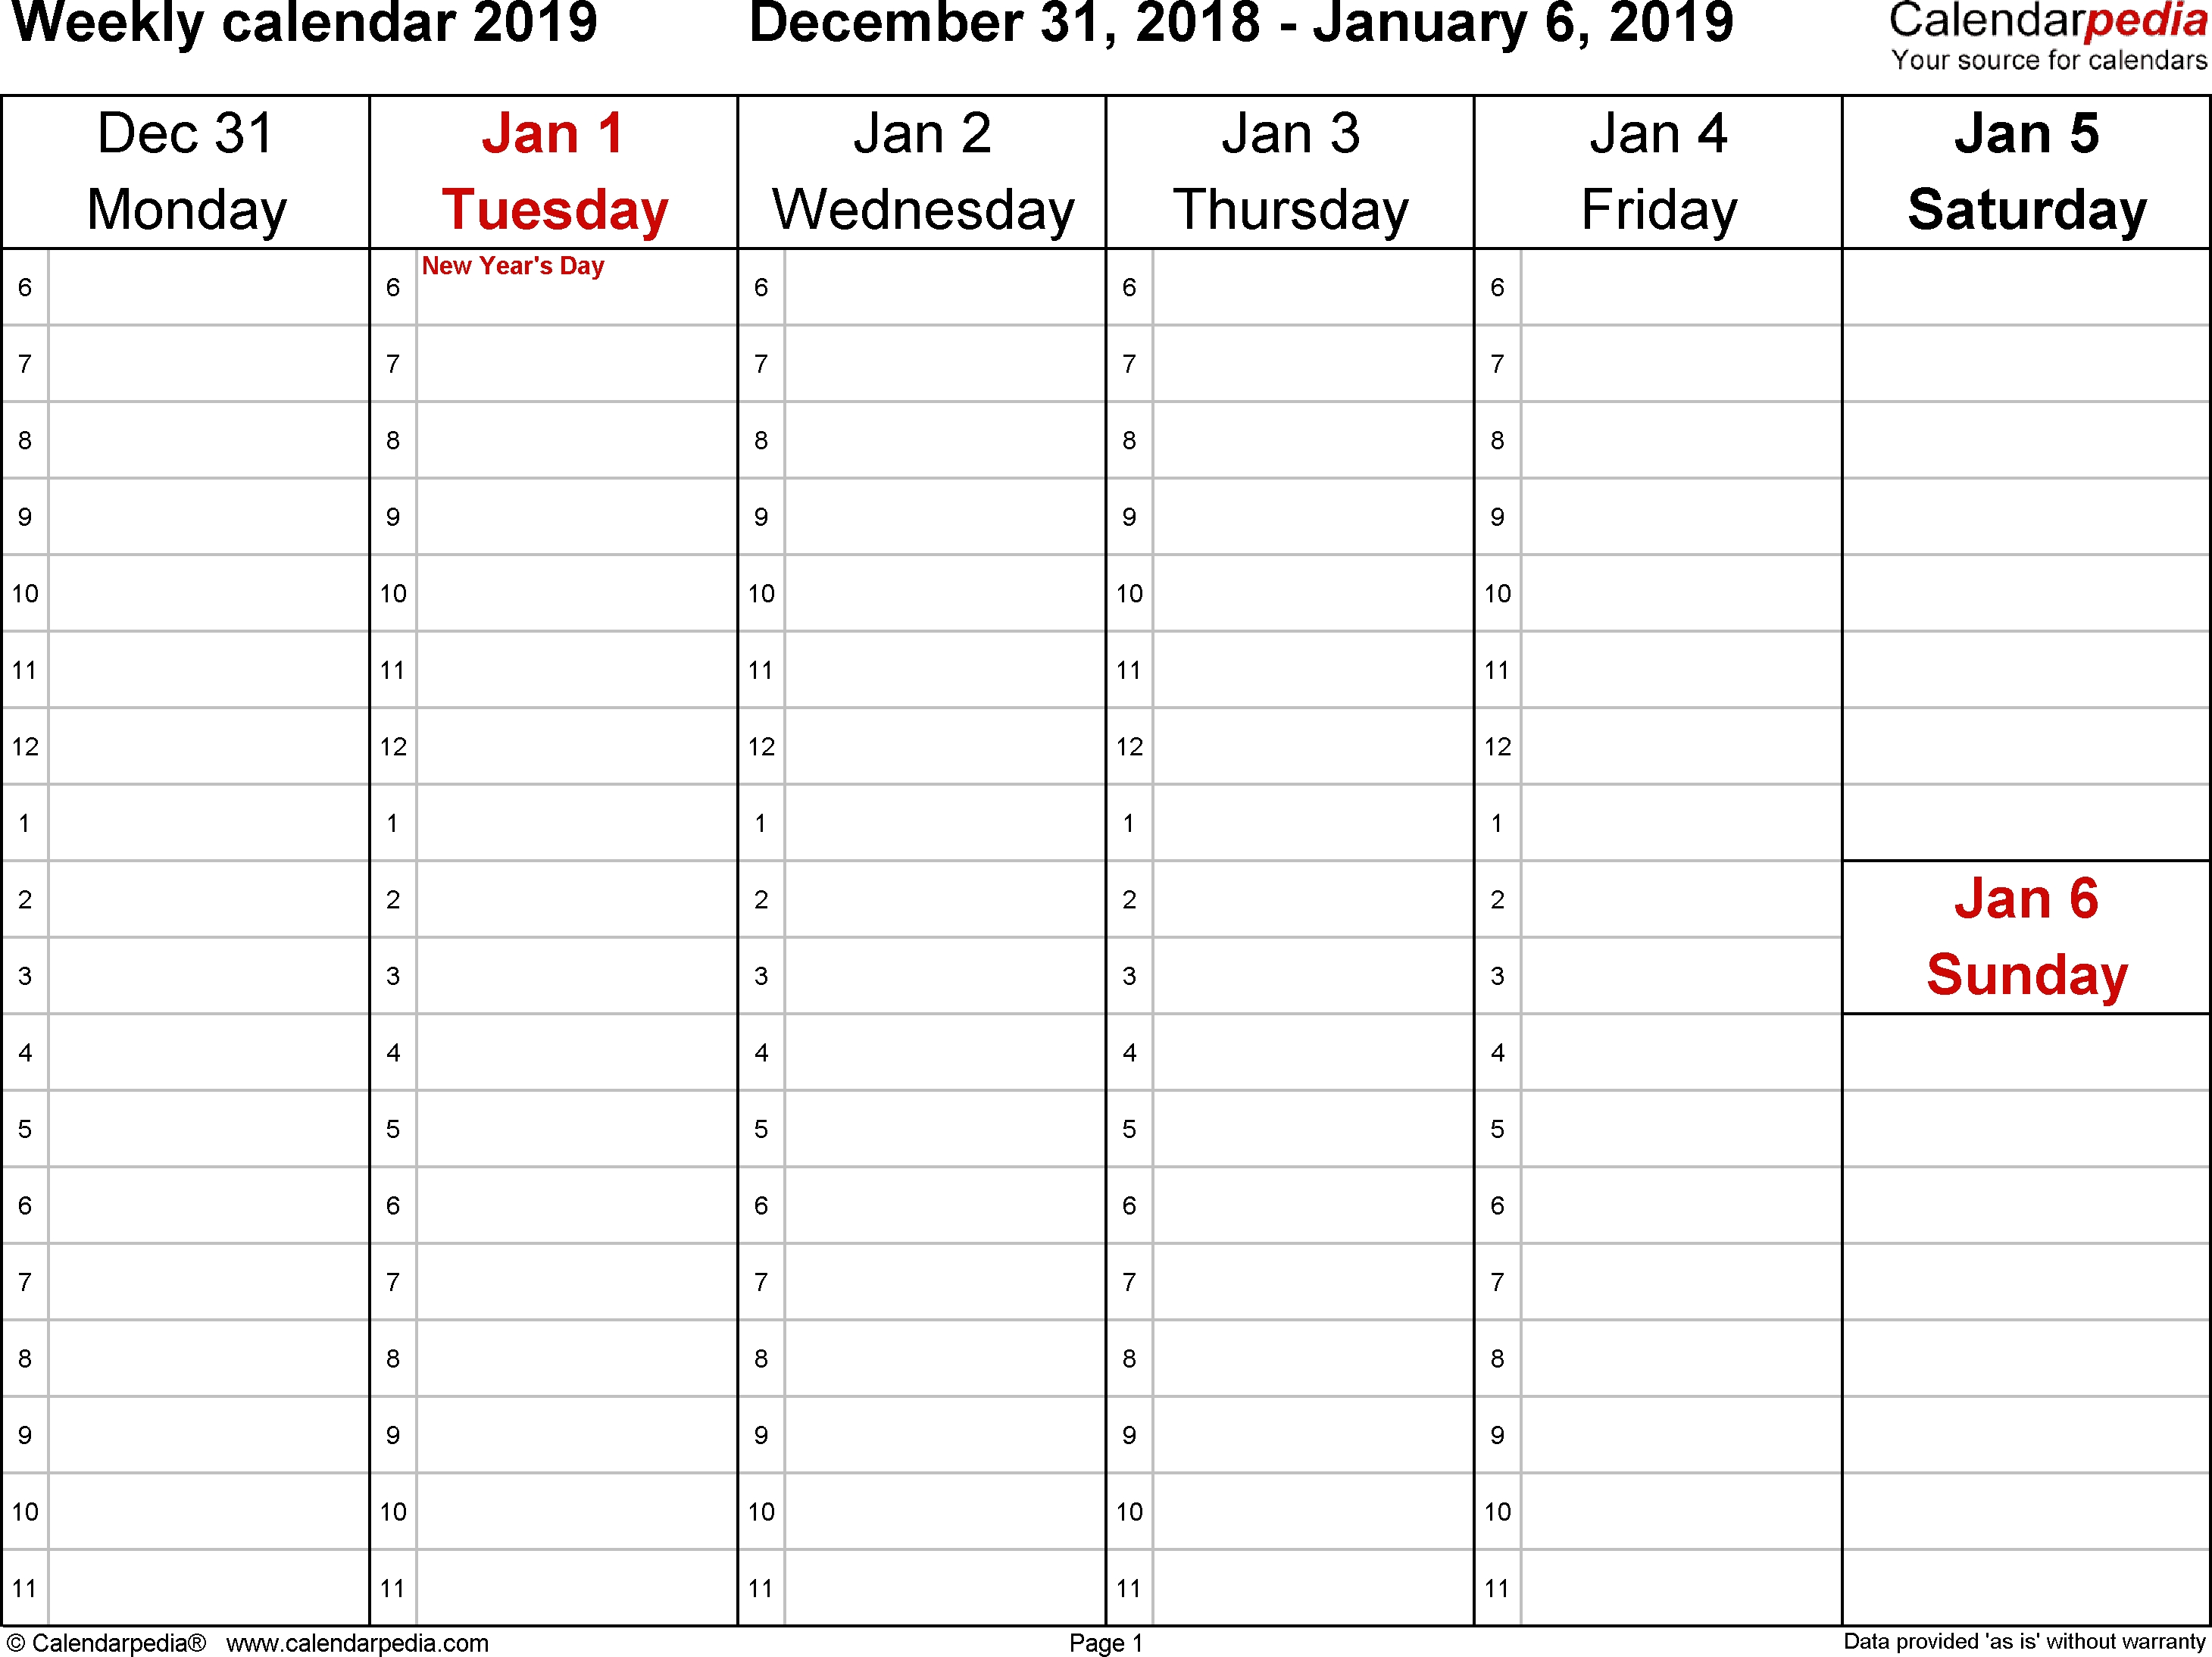 Weekly Calendars 2019 For Word - 12 Free Printable Templates Monday Through Friday Word Calendar